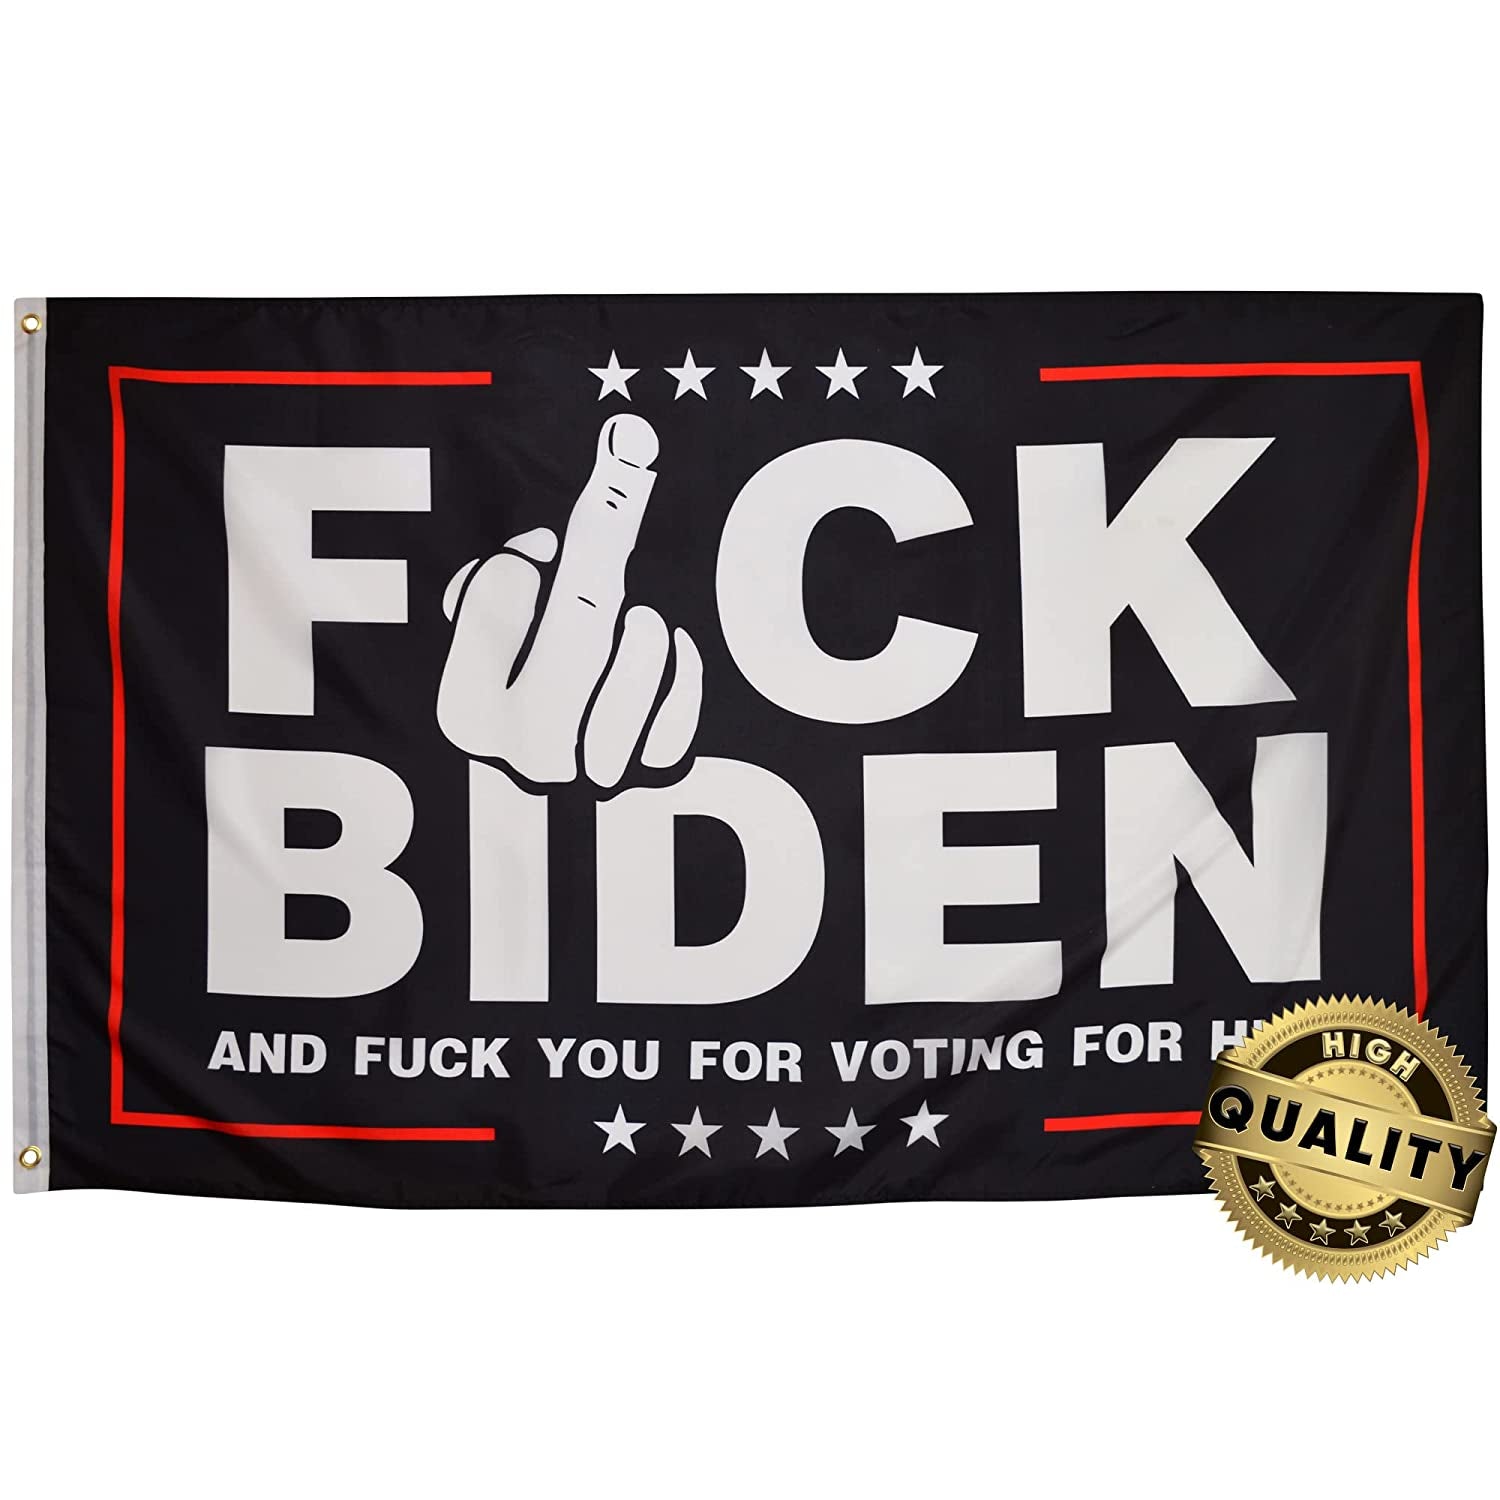 Eugenys, Eugenys Biden Flag 3X5 Foot - for Voting for Him Flag -Bright Vivid Colors, Double Stitched, Durable Brass Grommets - Perfect anti Biden Flag Banner for Indoor / Outdoor